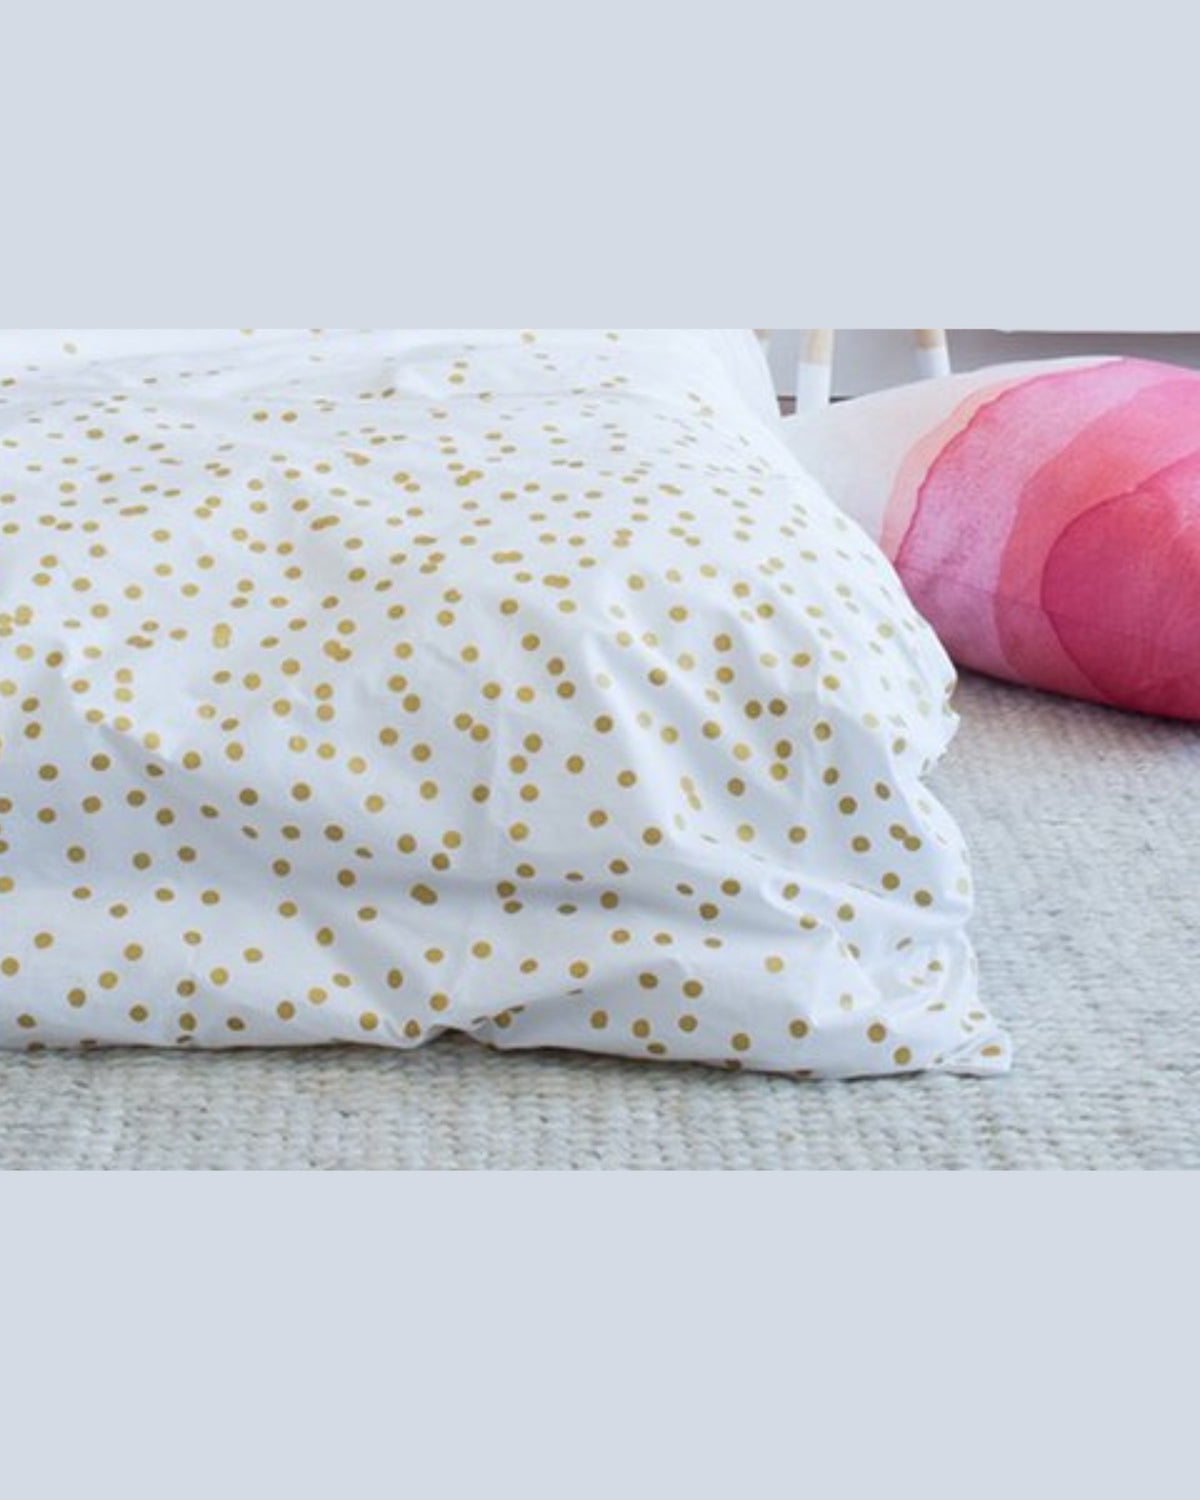 Double sprinkle sprinkle fitted sheet in gold. Freshen up your kid's bedroom by adding a gorgeous gold Sprinkle Sprinkle fitted sheet to your child's bed. Featuring polka dots both front and back. 100% organic cotton and machine washable.  Size: Double